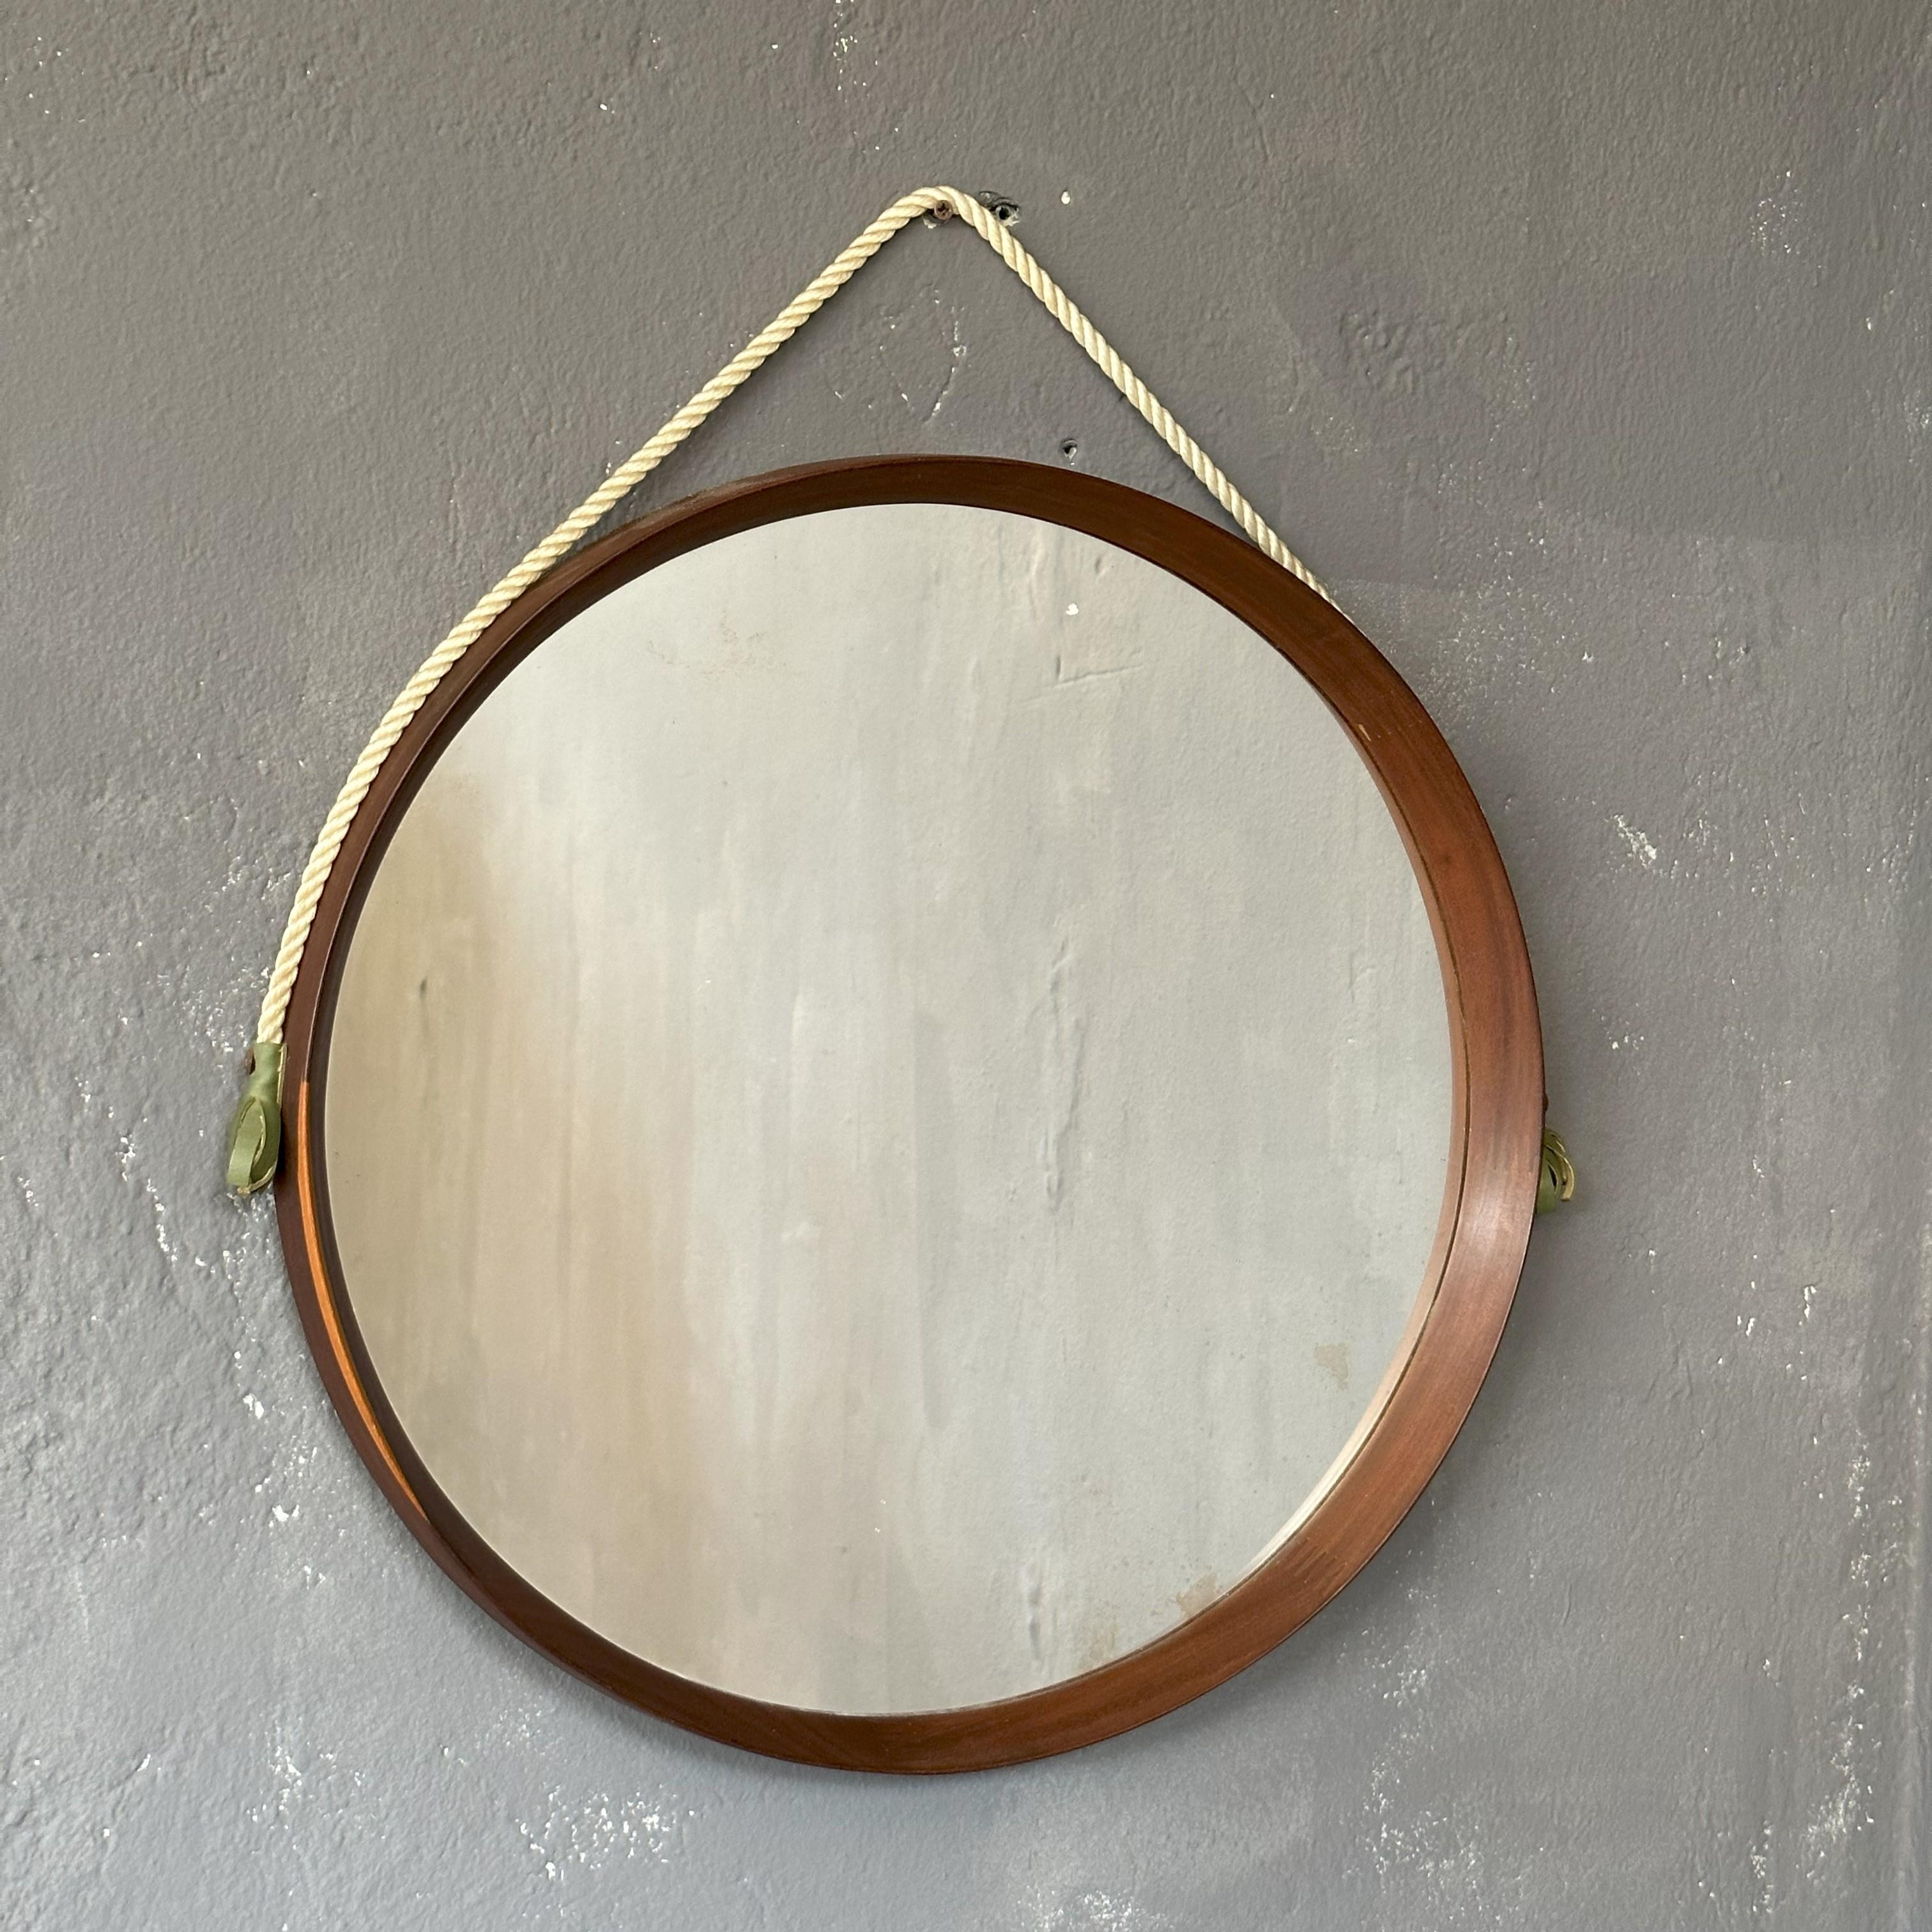 Round mirror with teak frame, 1960s, Italian manufacture, with hanging rope
The mirror with a diameter of 51cm, with the rope has a total height of 60cm.
Along the entire circumference a teak frame with beautiful wood details visible in the